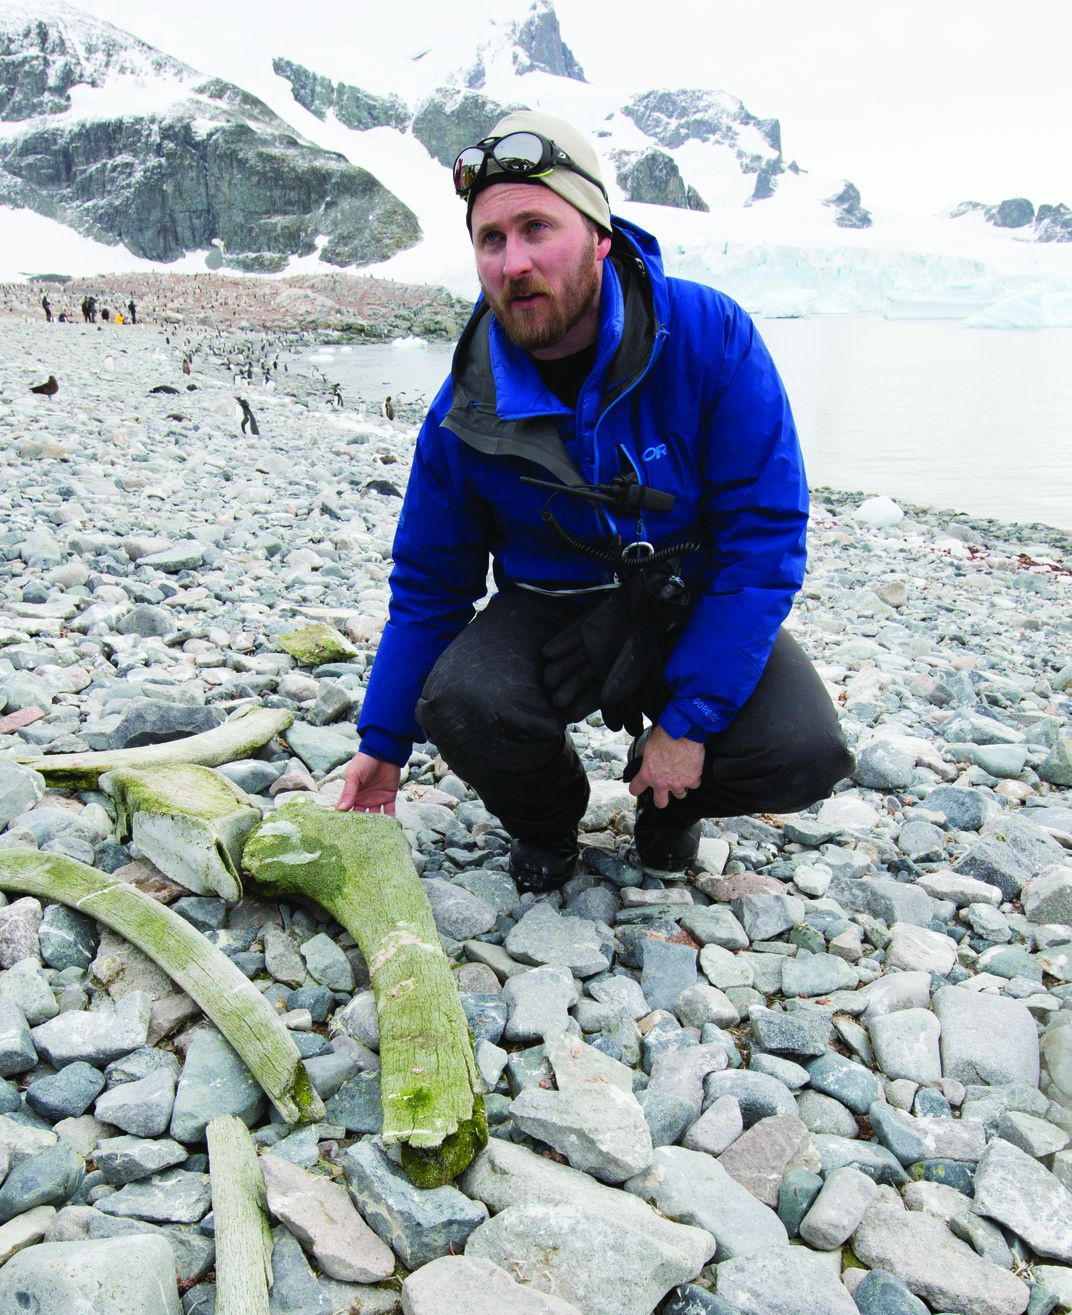  Nick Pyenson points to a whale bone on Cuverville Island in Antarctica